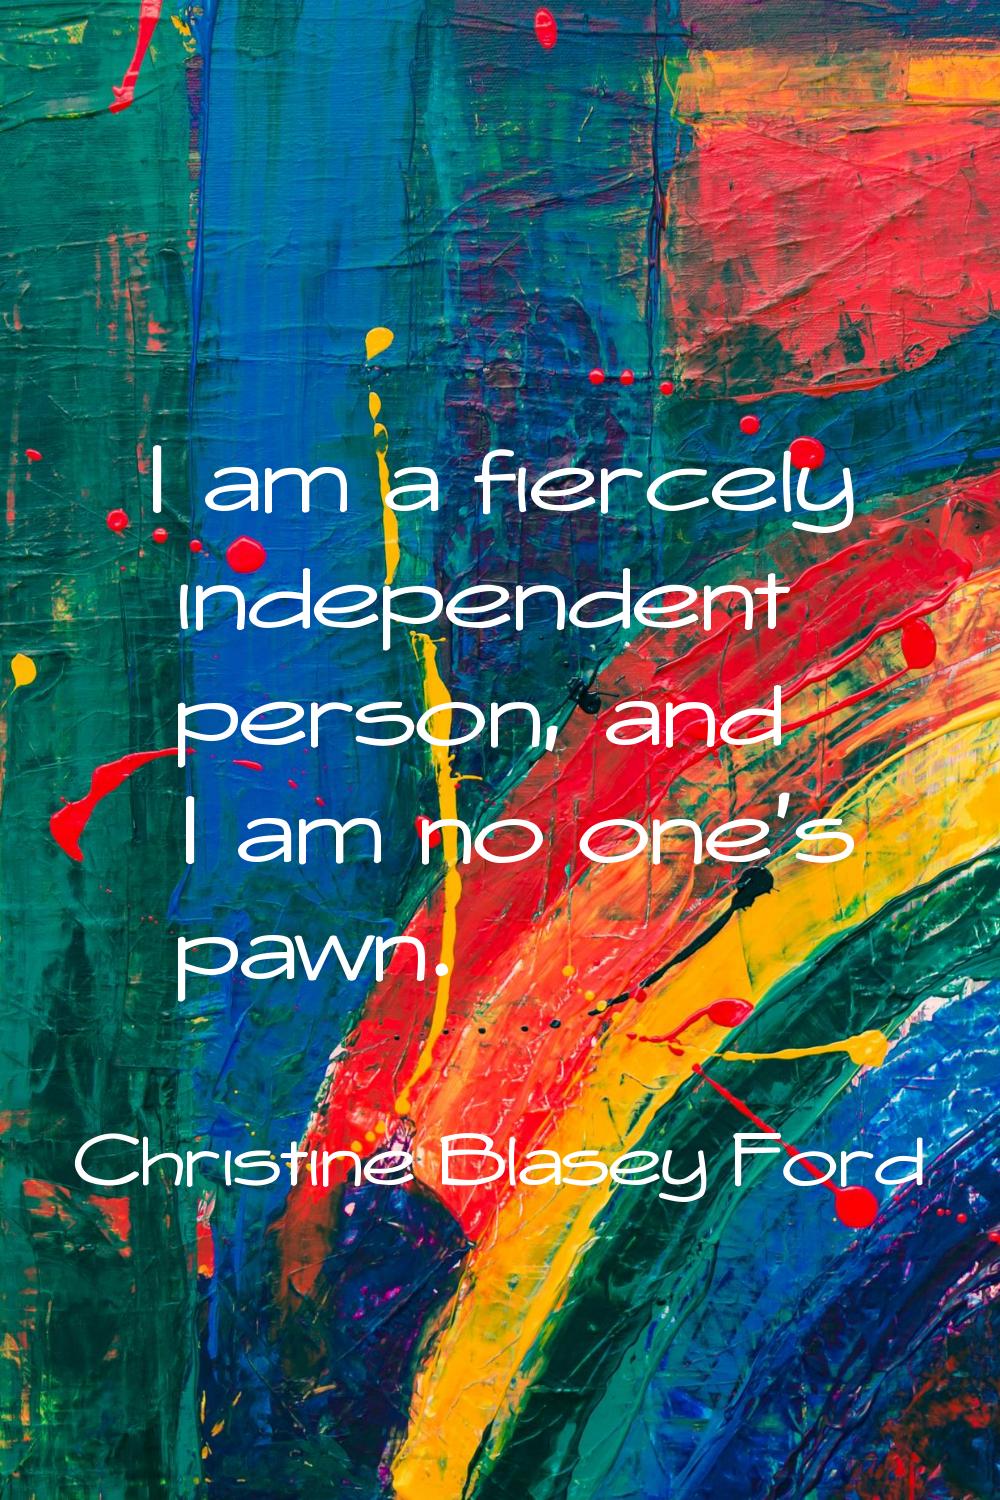 I am a fiercely independent person, and I am no one's pawn.